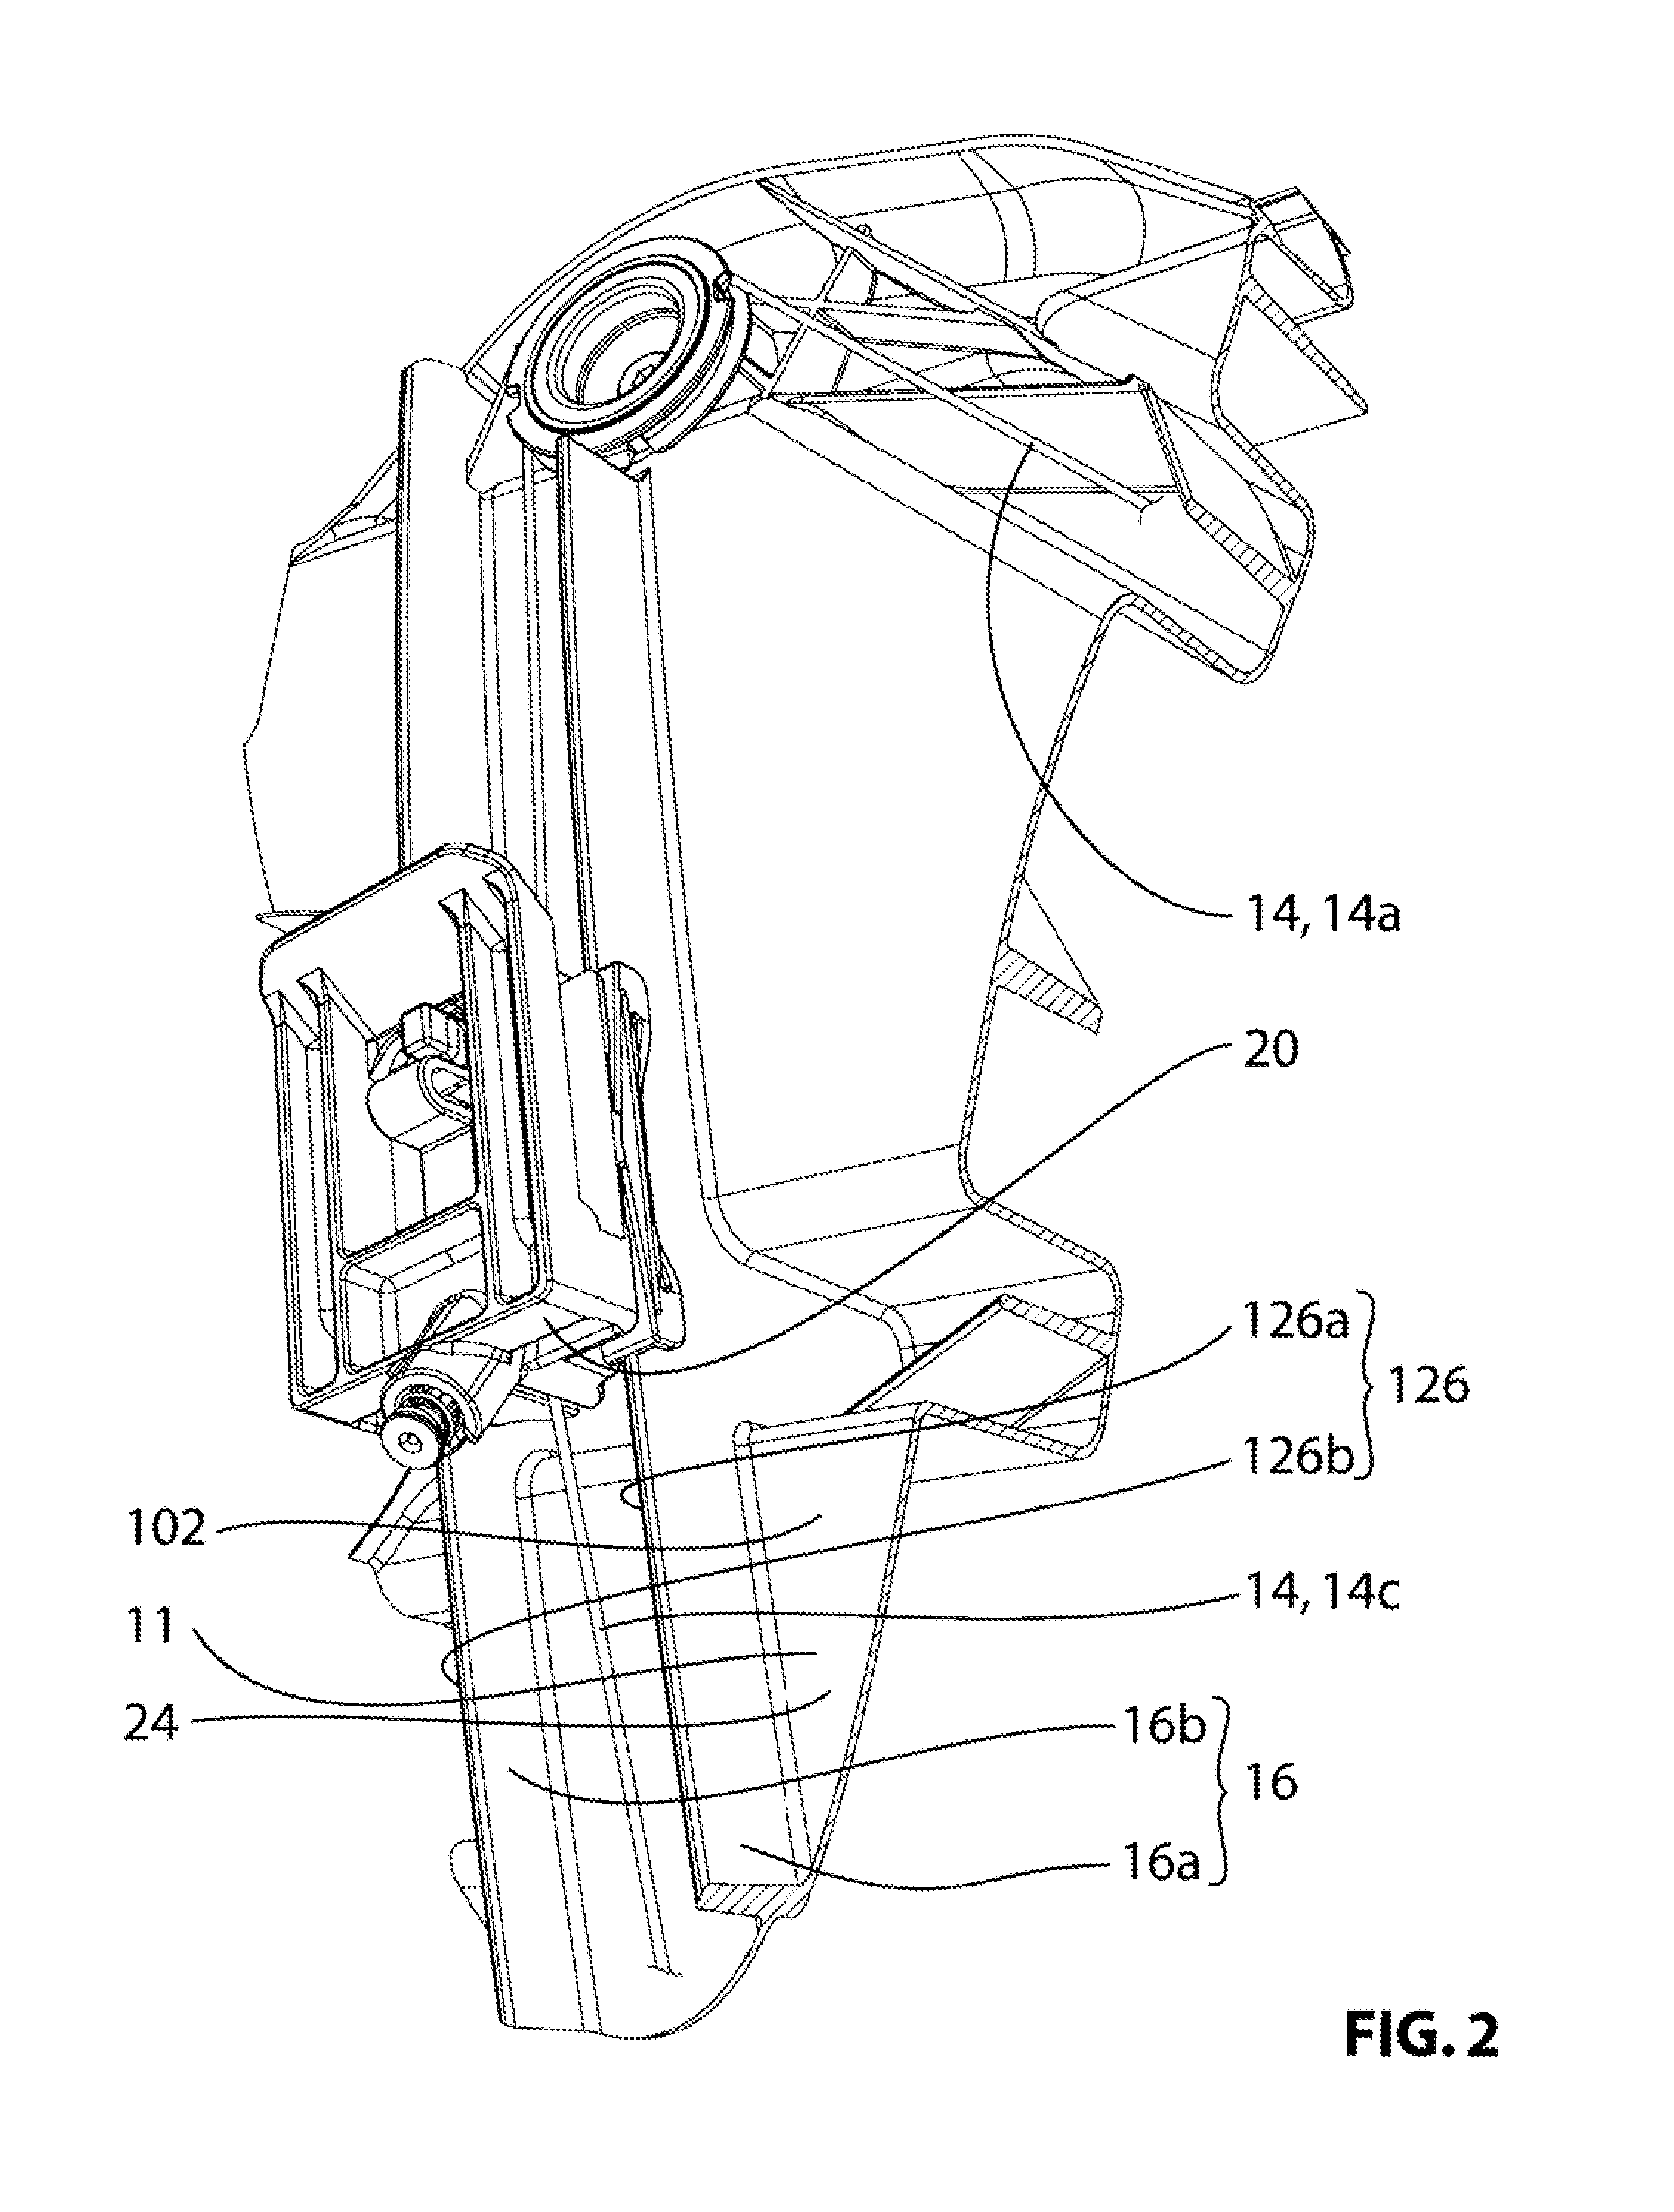 Window regulator assembly for a vehicle